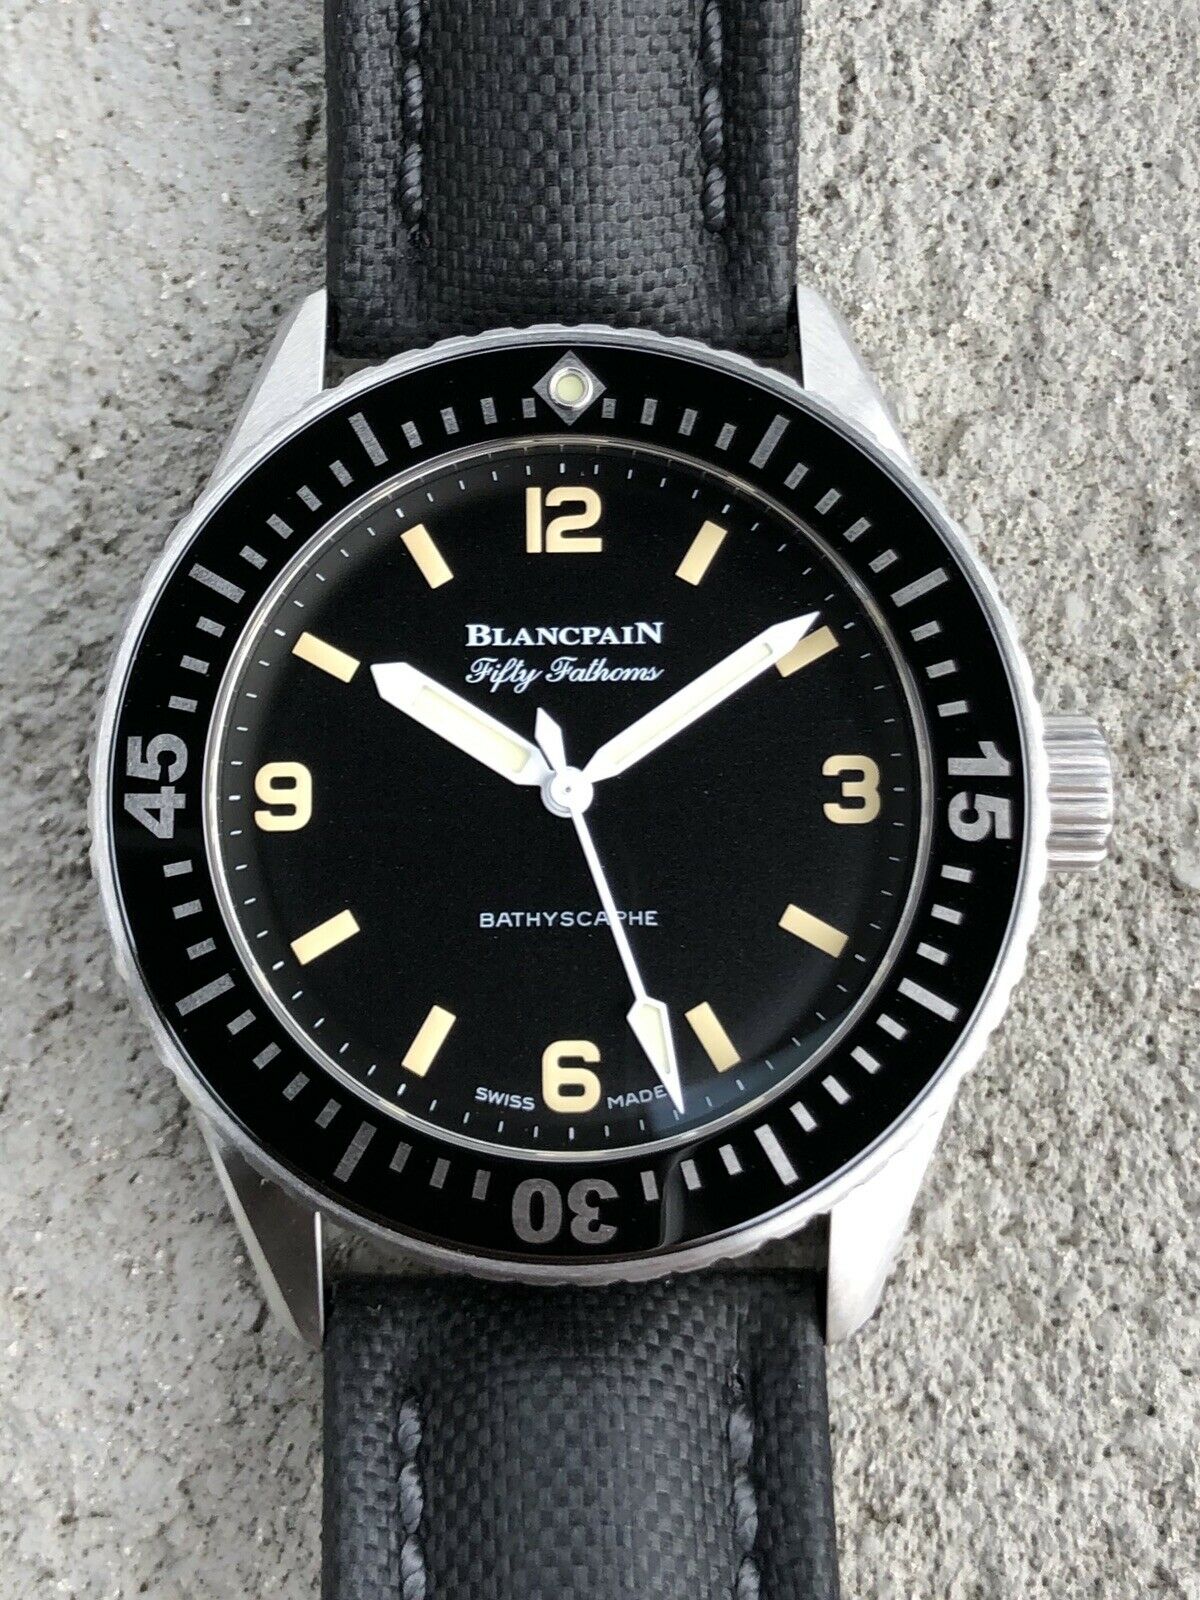 Blancpain_Fifty_Fathoms_Bathyscaphe_Limited_Edition_for_HODINKEE_-_Brand_New_281_29.jpg